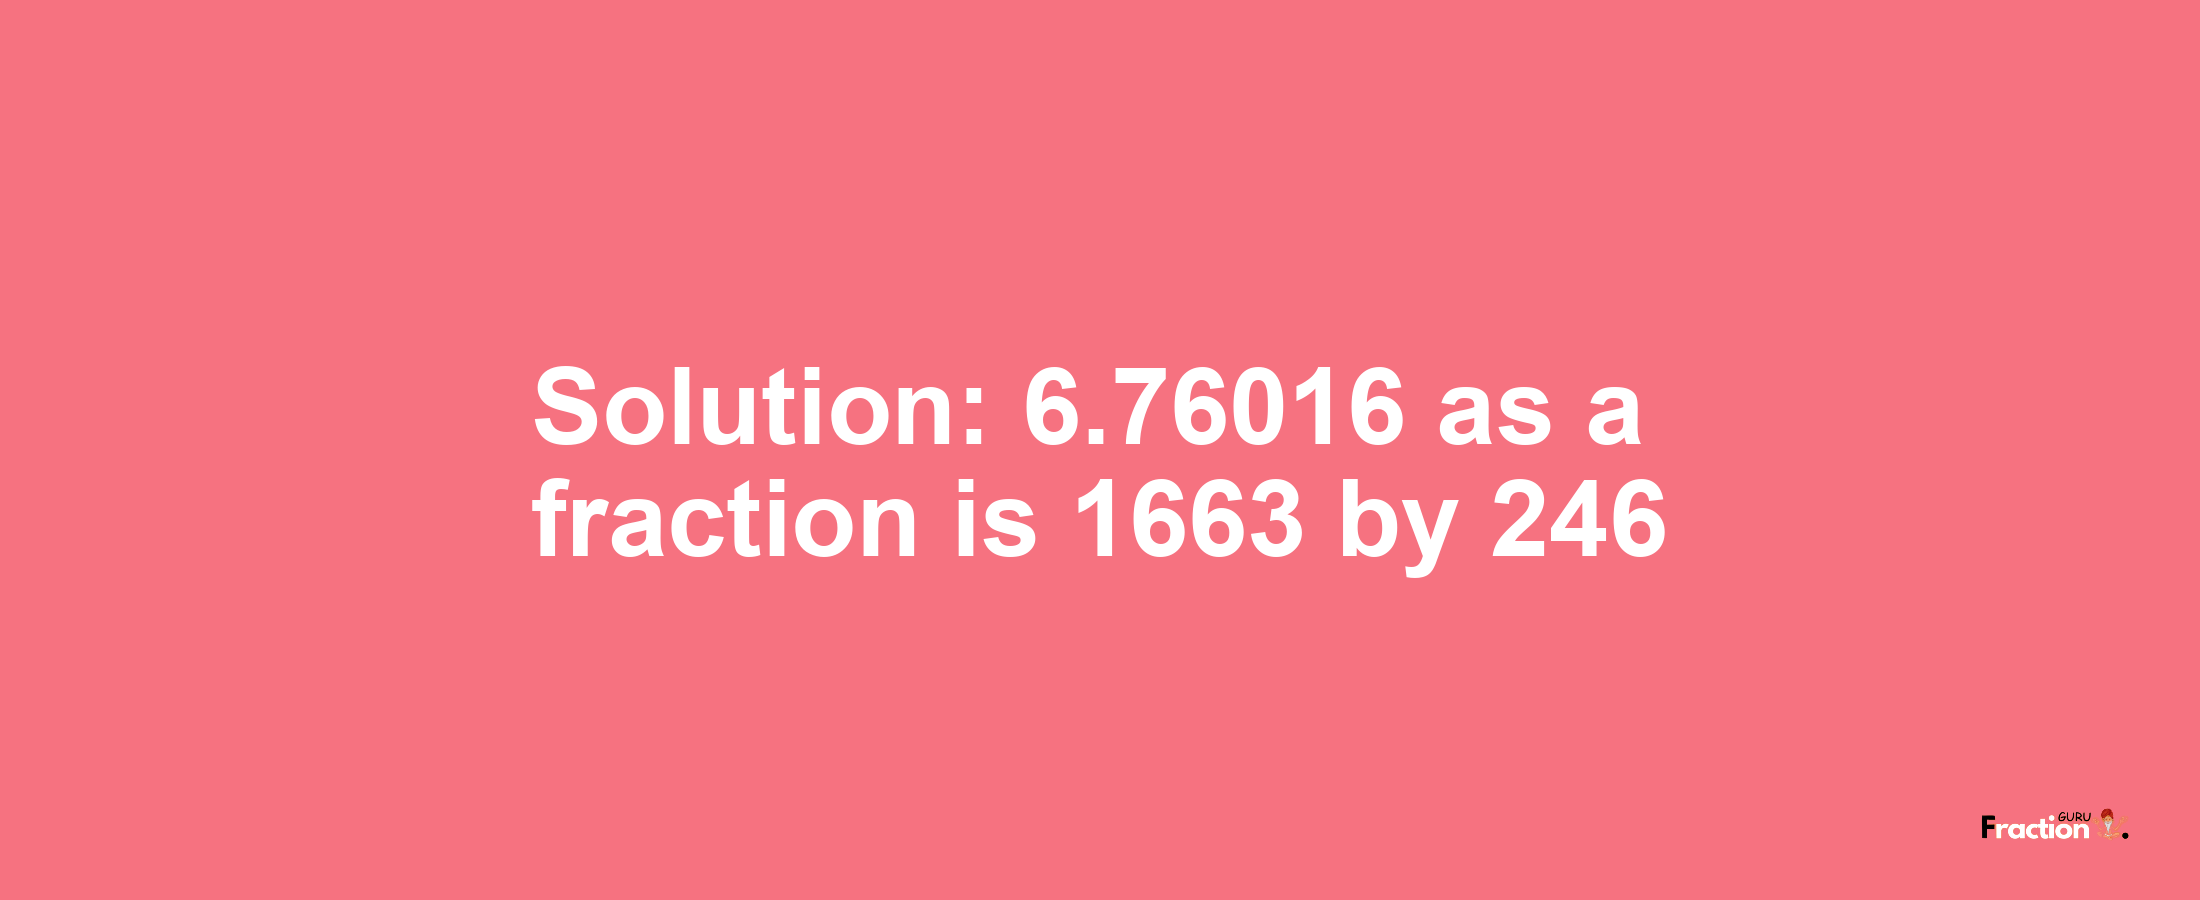 Solution:6.76016 as a fraction is 1663/246